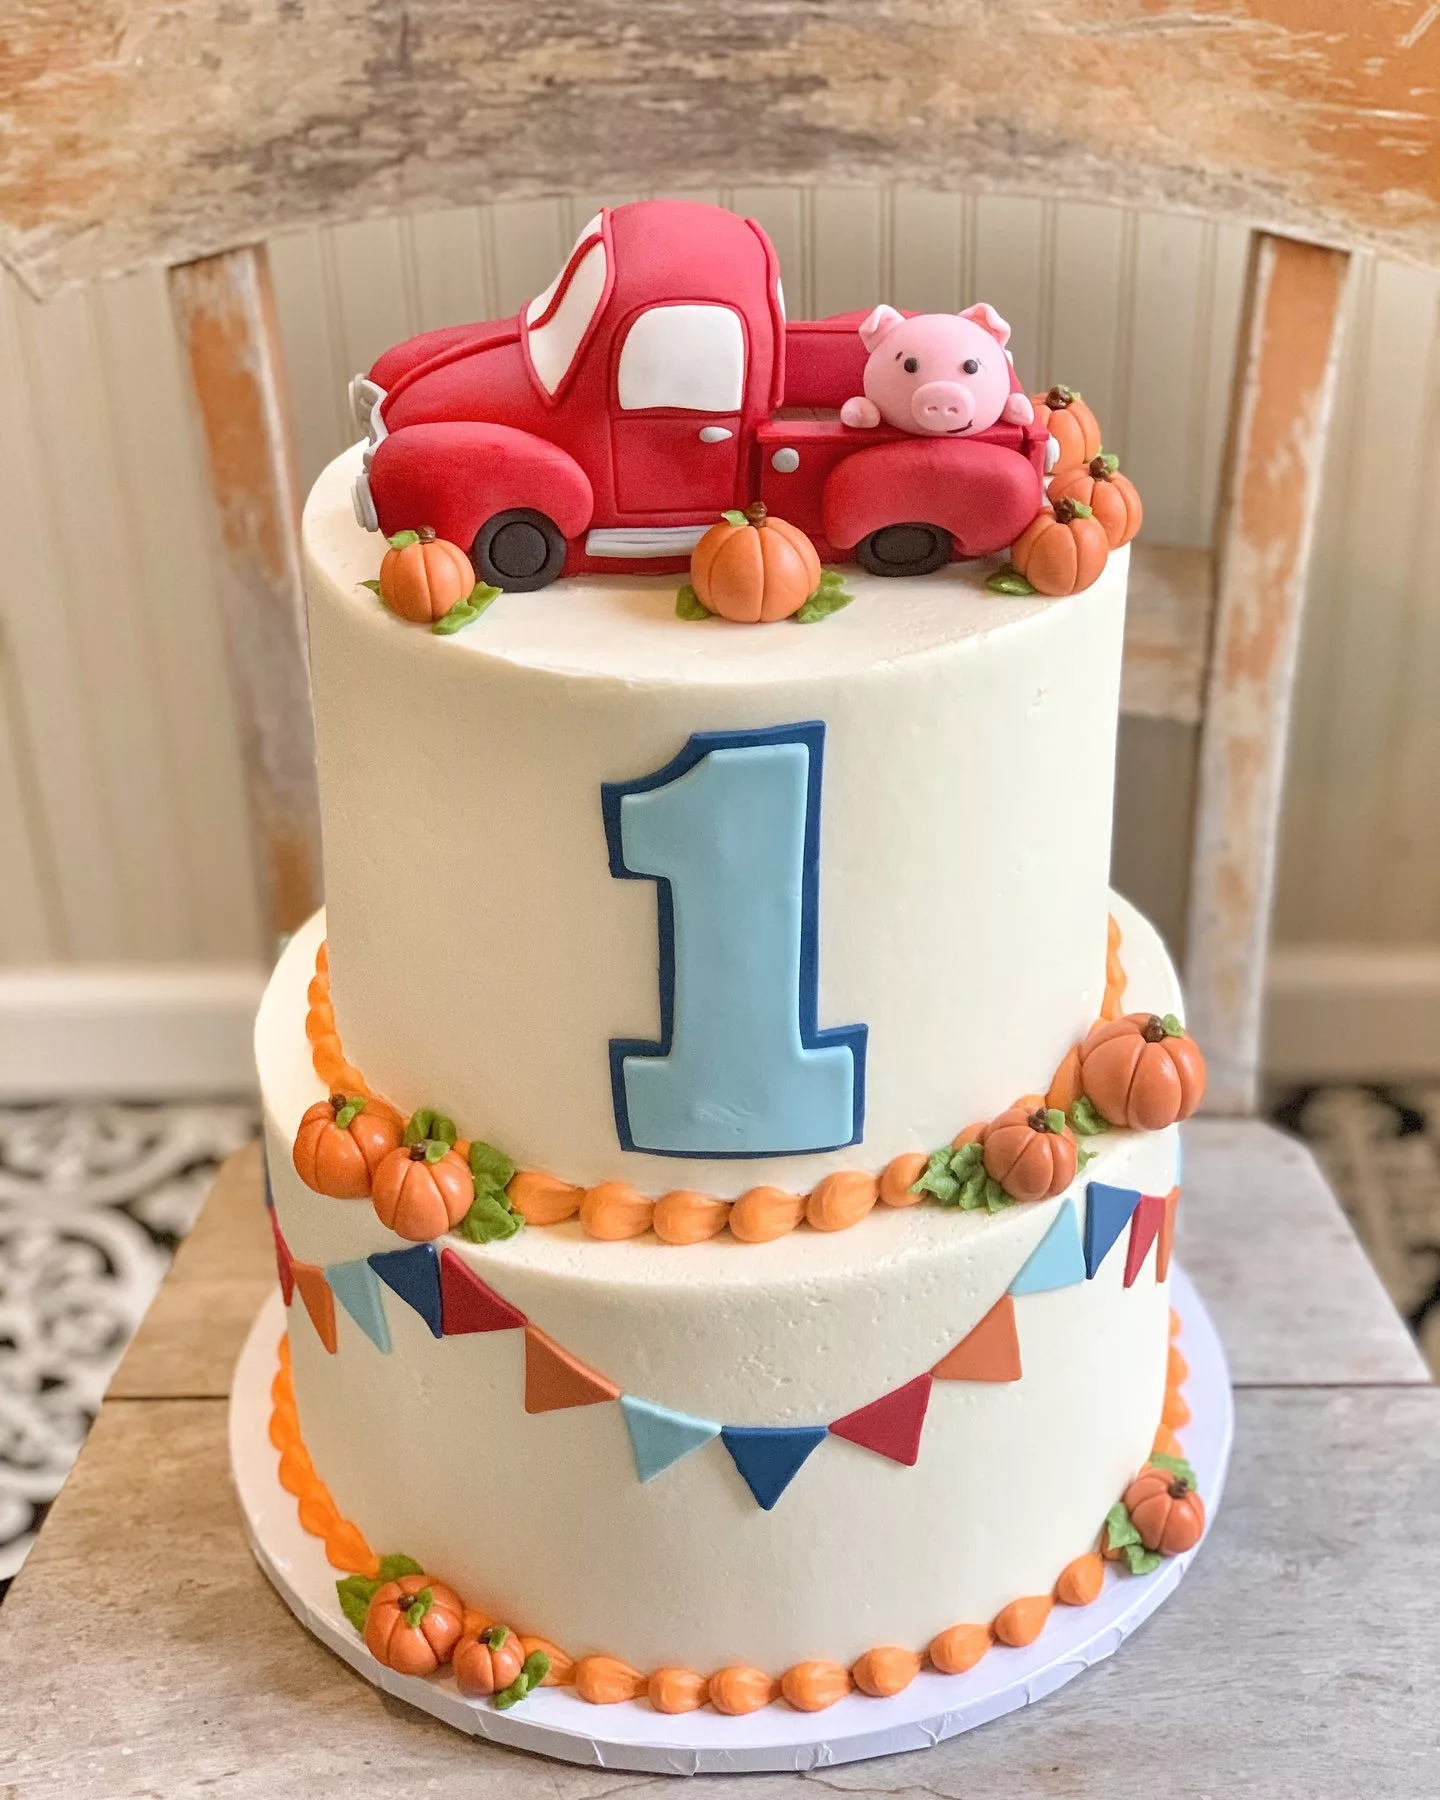 Autumn Harvest frosted cake with pumpkins and red truck